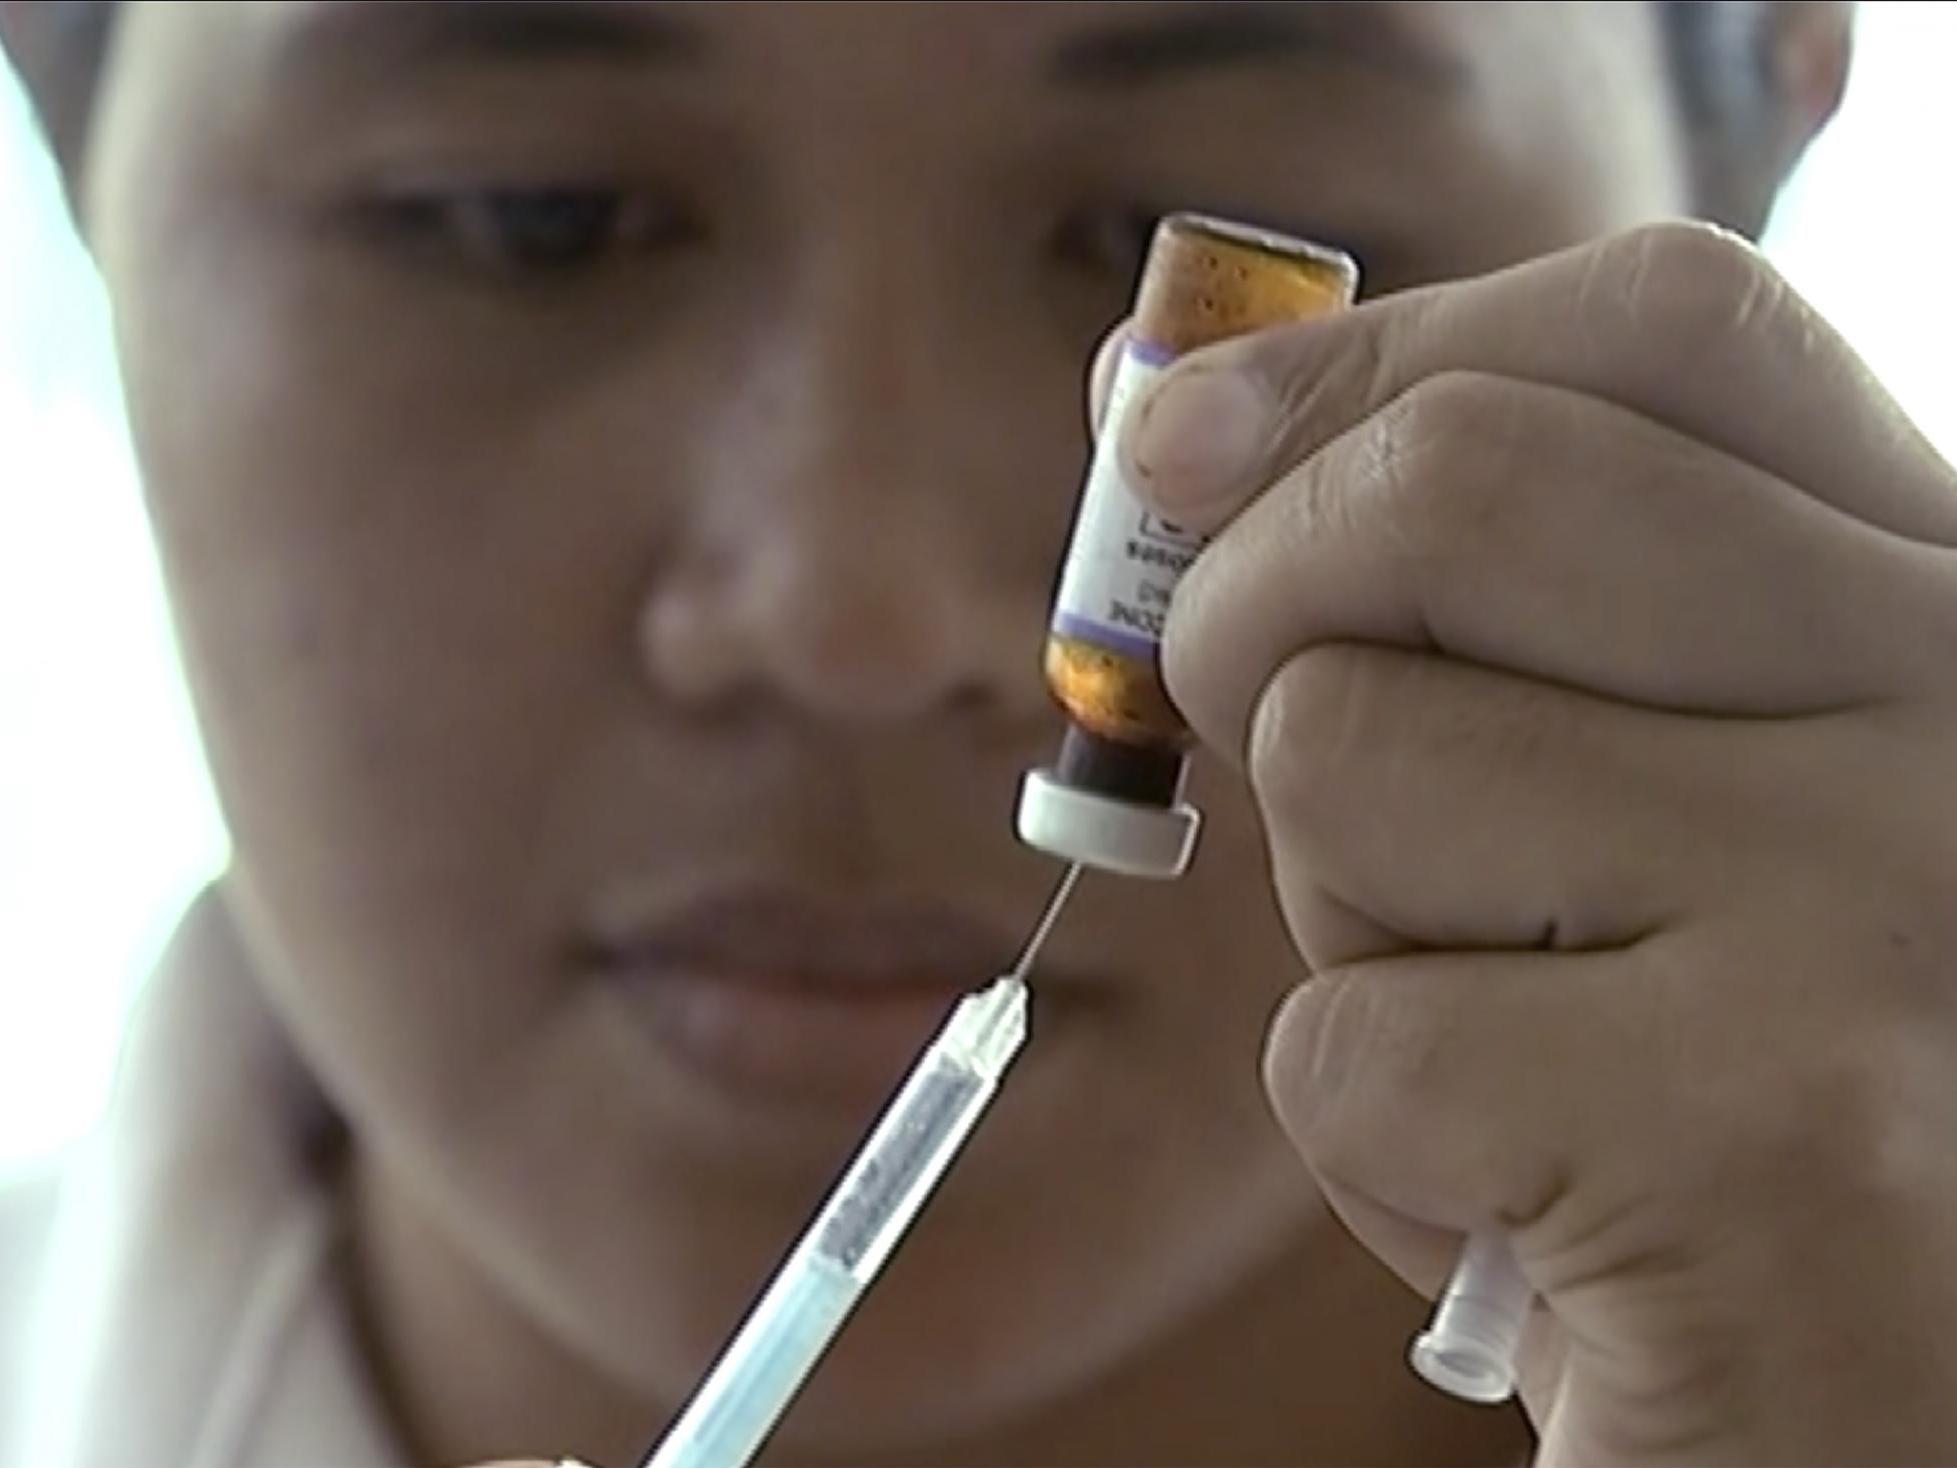 A New Zealand health official prepares a measles vaccination at a clinic.